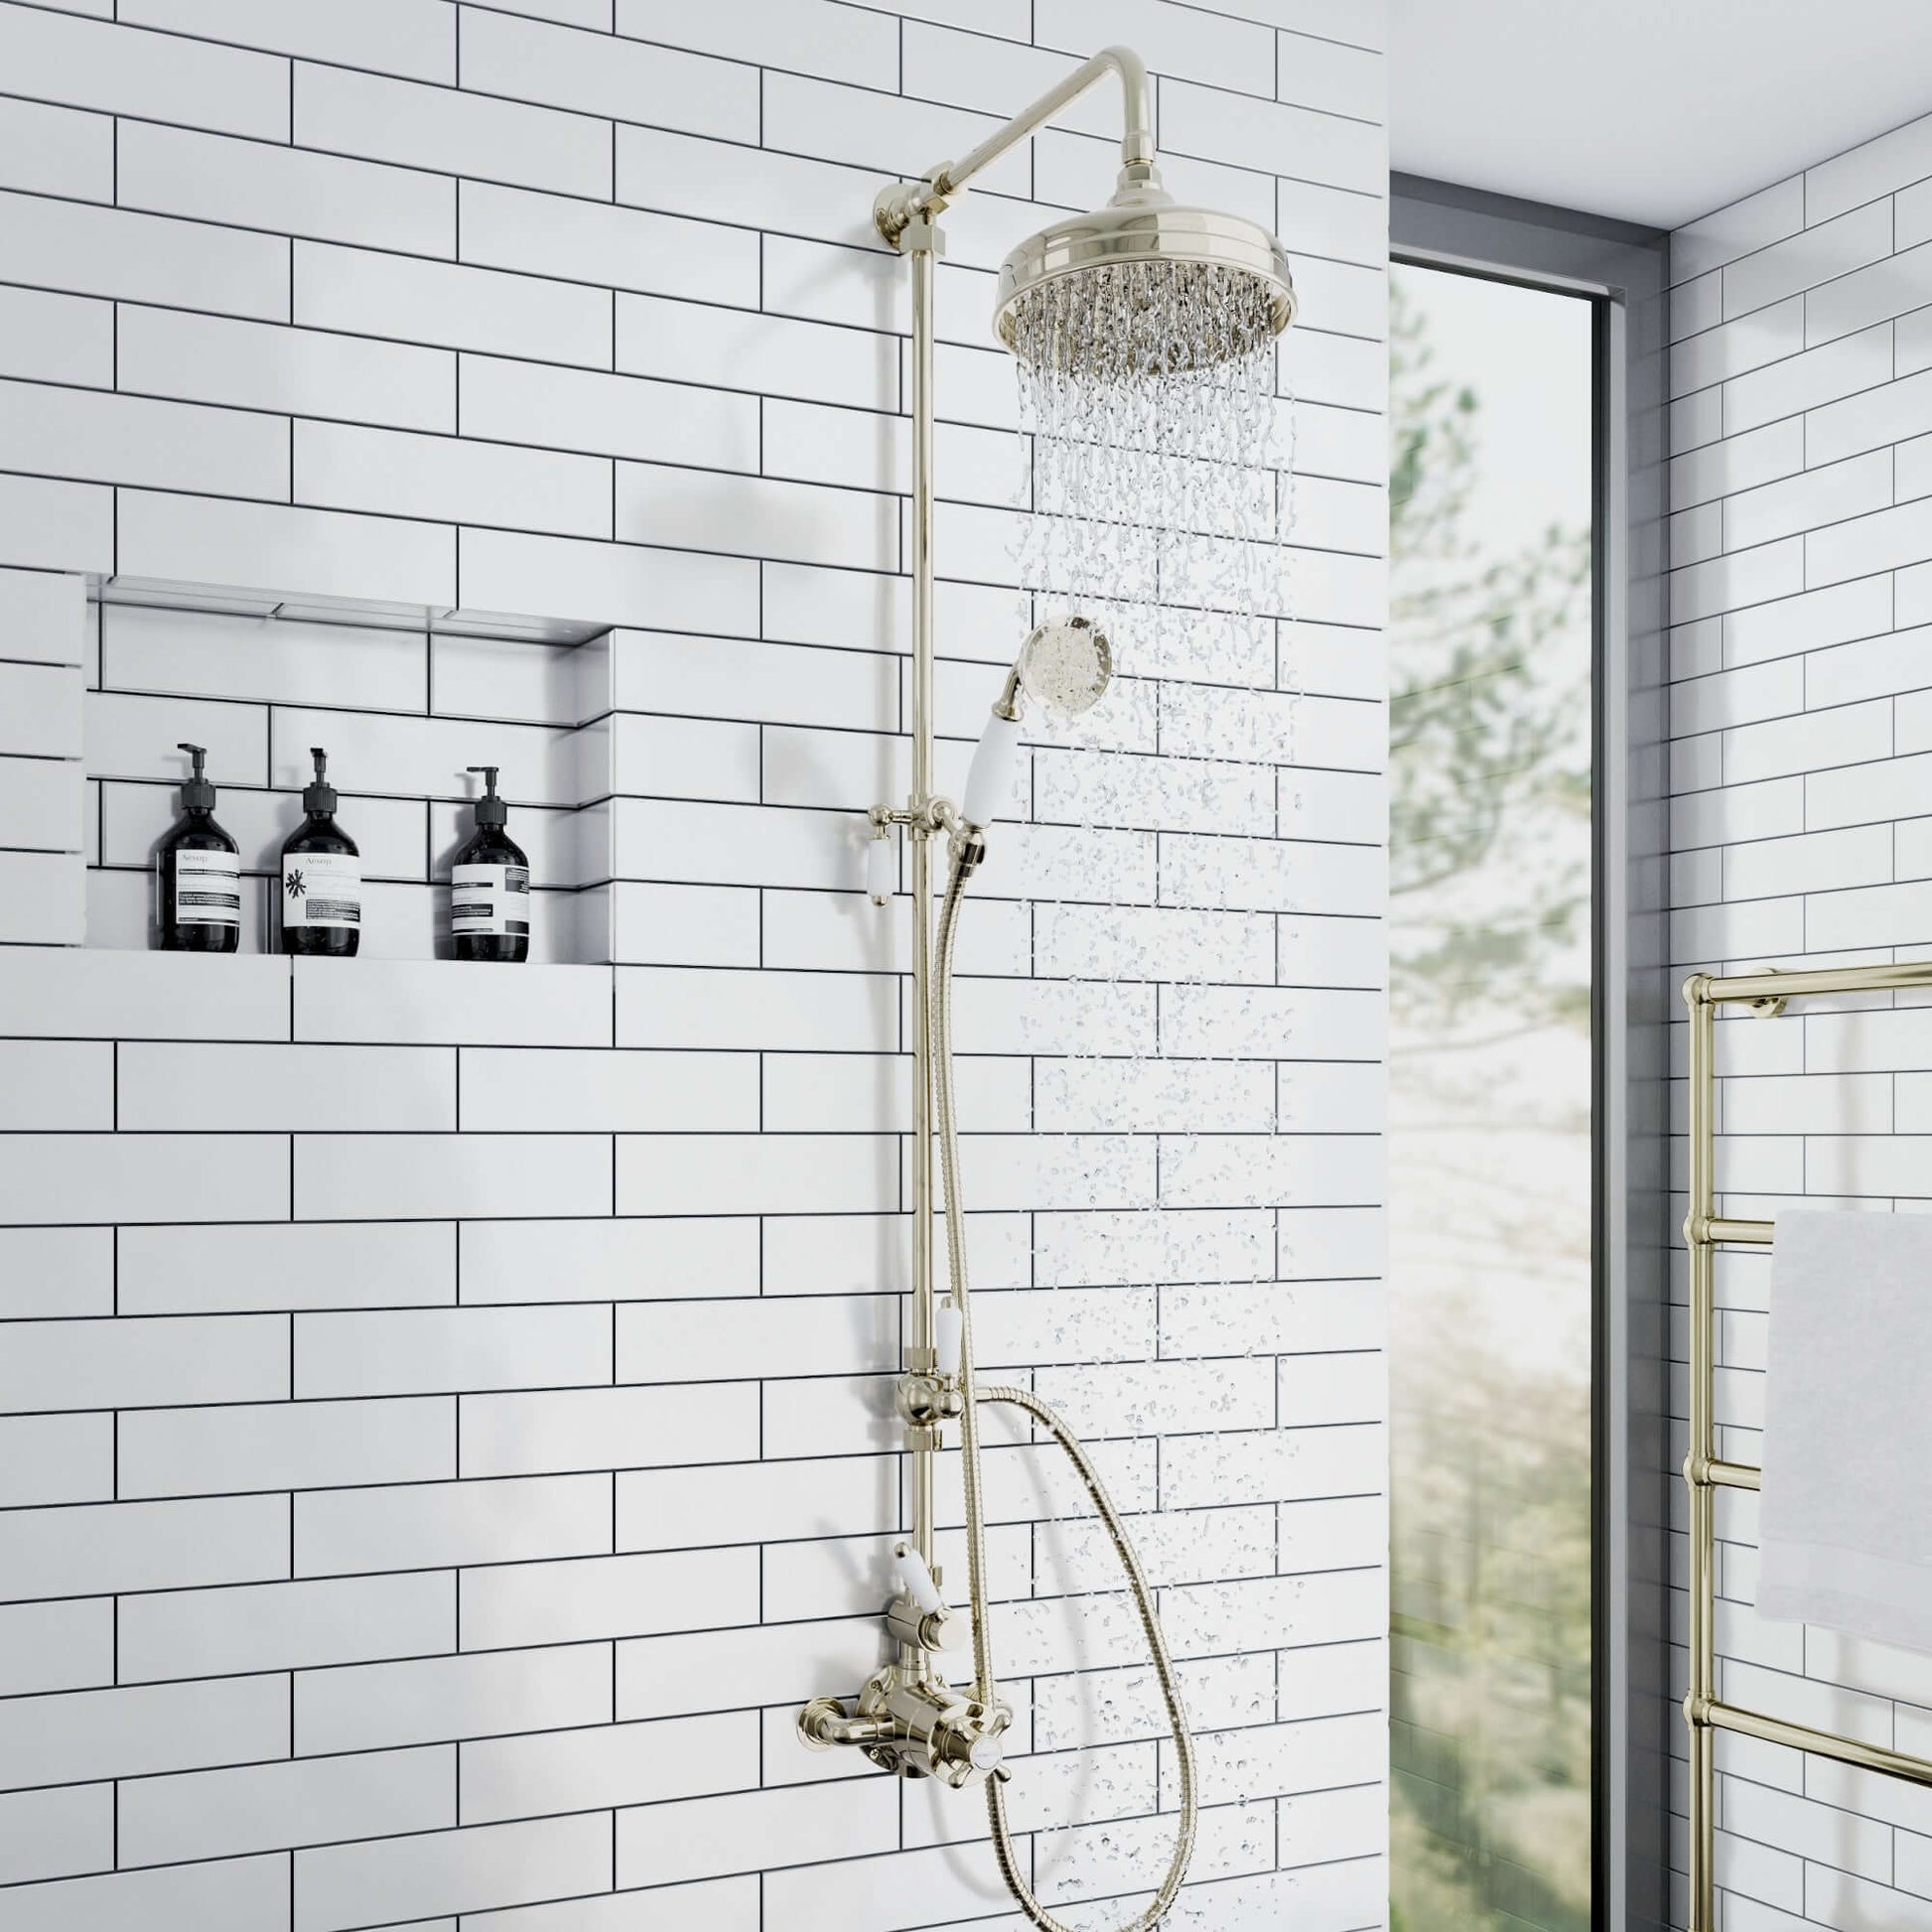 Downton Exposed Traditional Thermostatic Shower Set 2 Outlet Incl. Twin Shower Valve With Diverter, Rigid Riser Rail, 200mm Shower Head & Ceramic Handset - English Gold And White - Showers